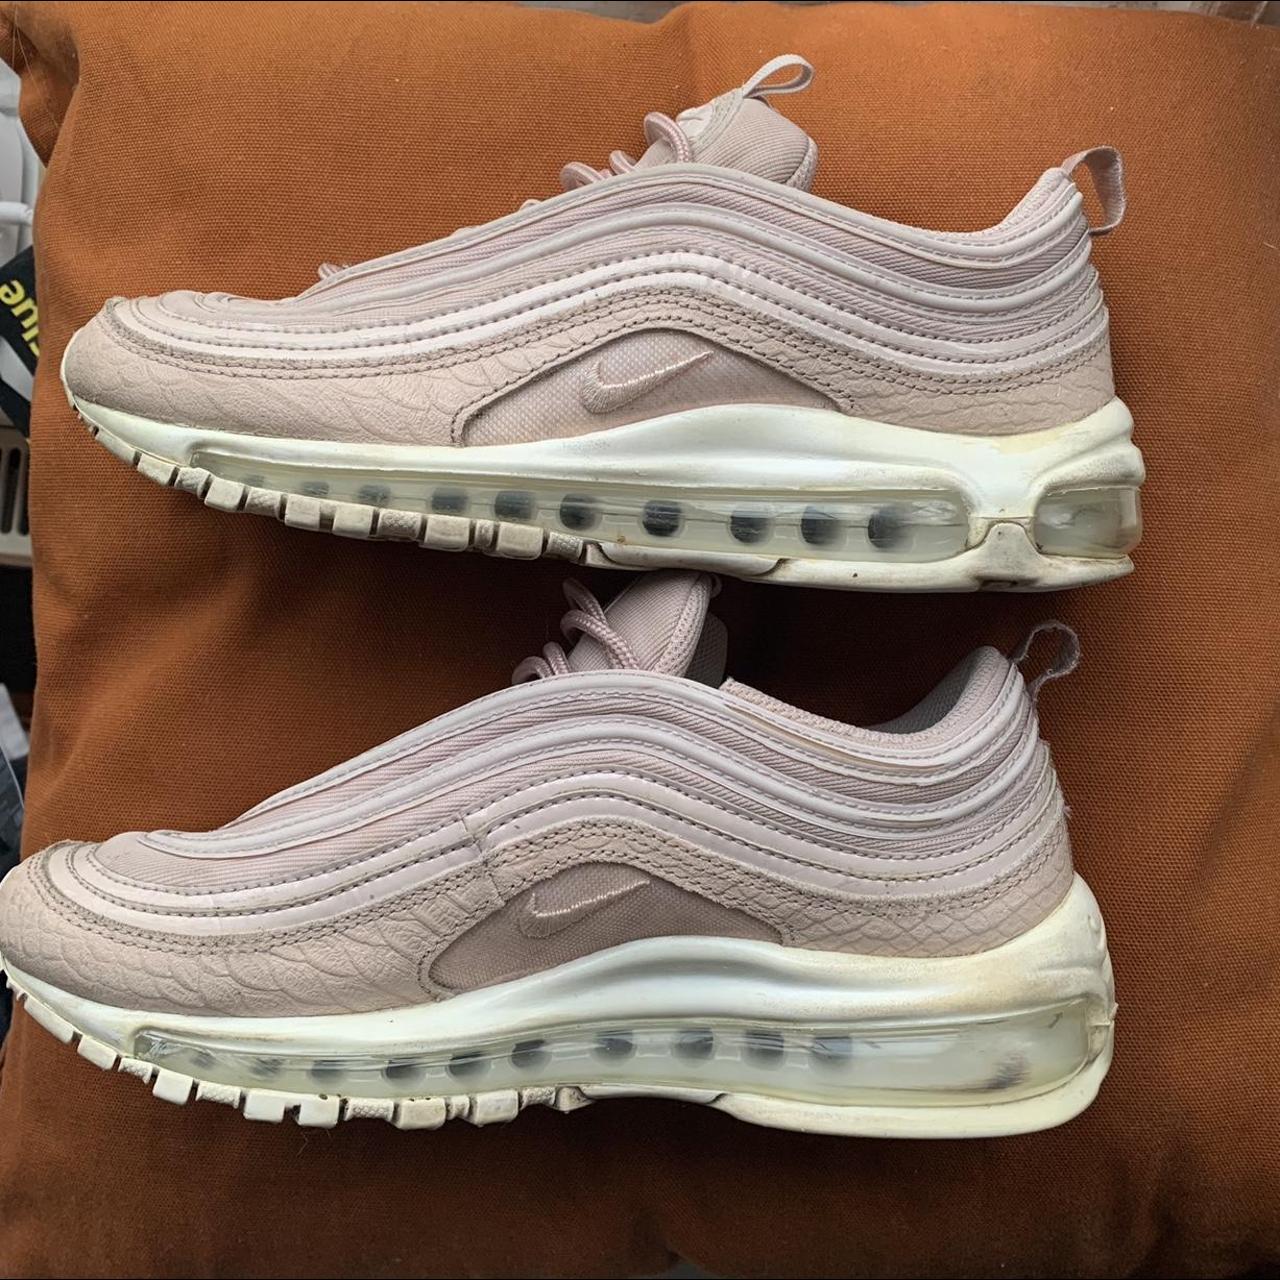 Light dusty pink and white air max 97. Sad to part... - Depop